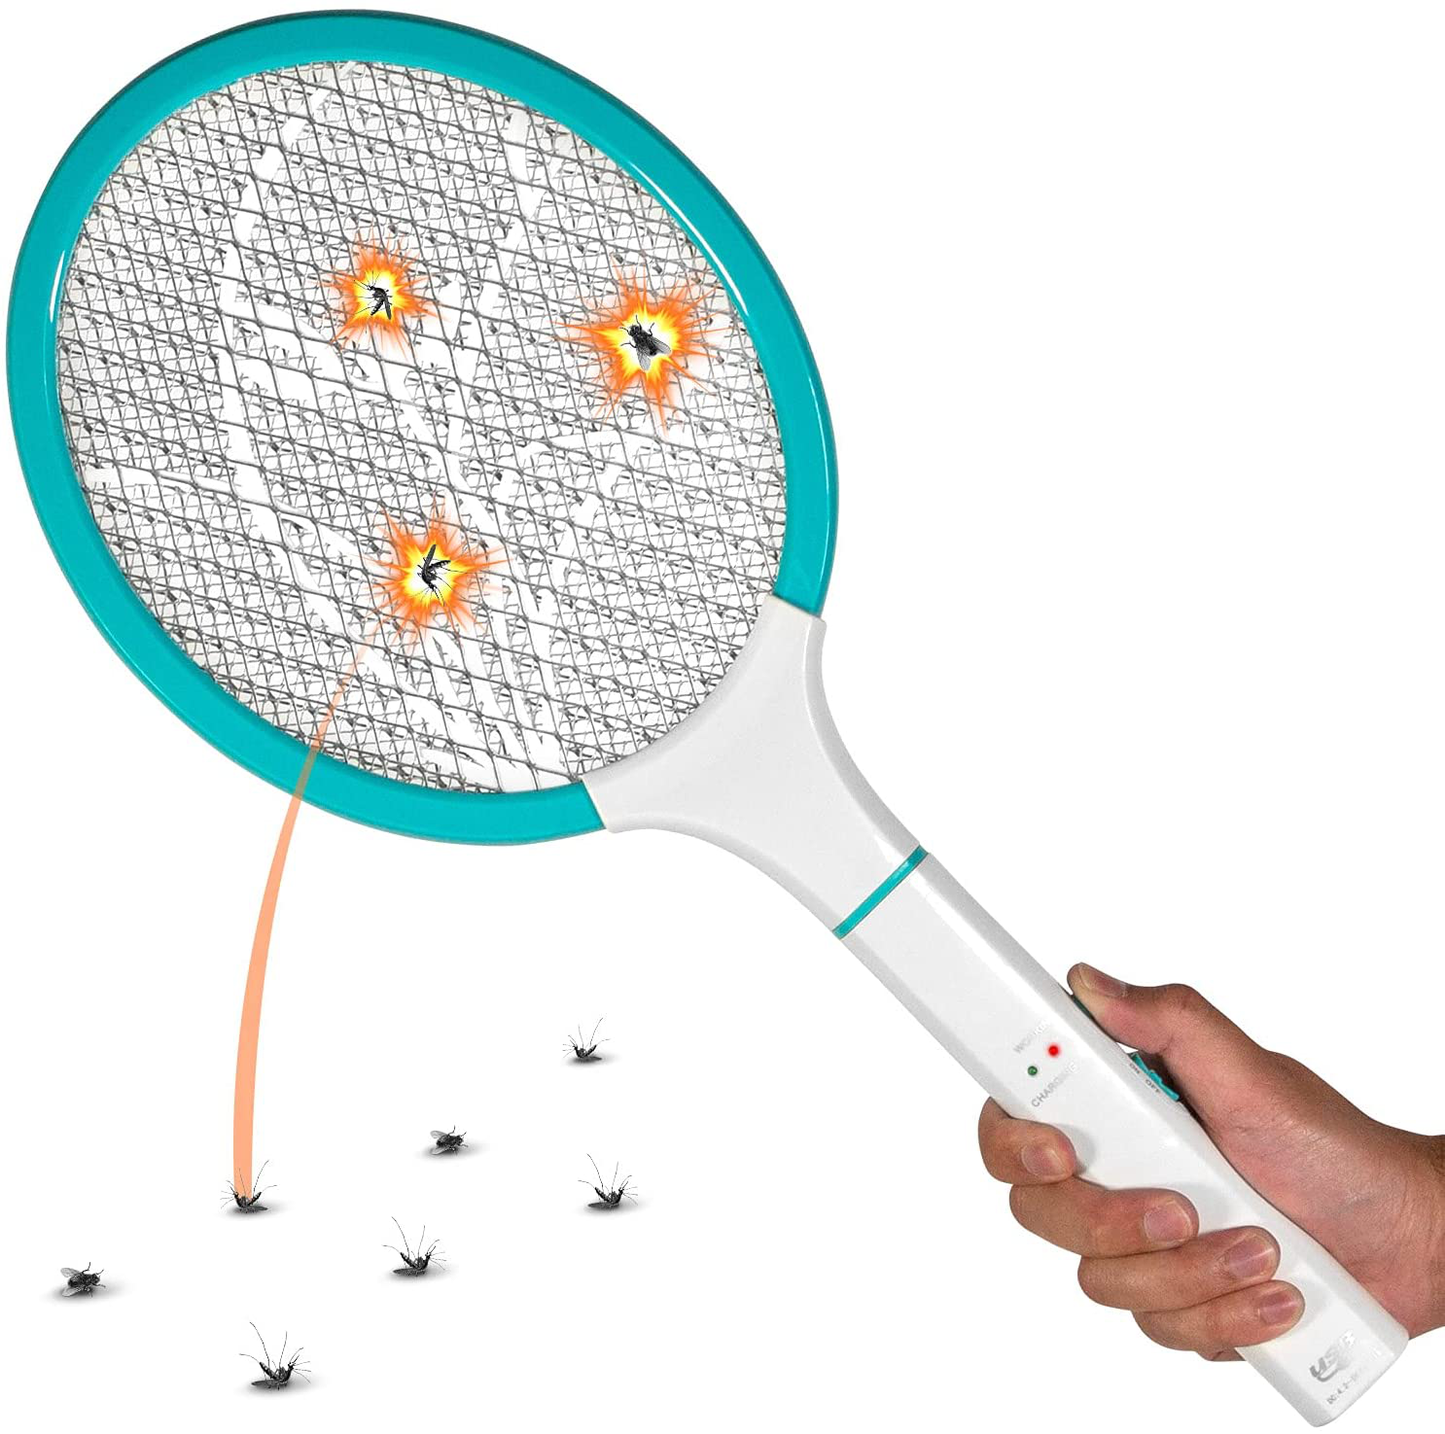 BugKwikZap 2PK of USB Rechargeable Electric Bug Zapper 3600V, Mosquito Killer Racket, Rechargeable Battery Powered Fly Swatter Great for Home, Outdoor Picnics (White-Aqua)